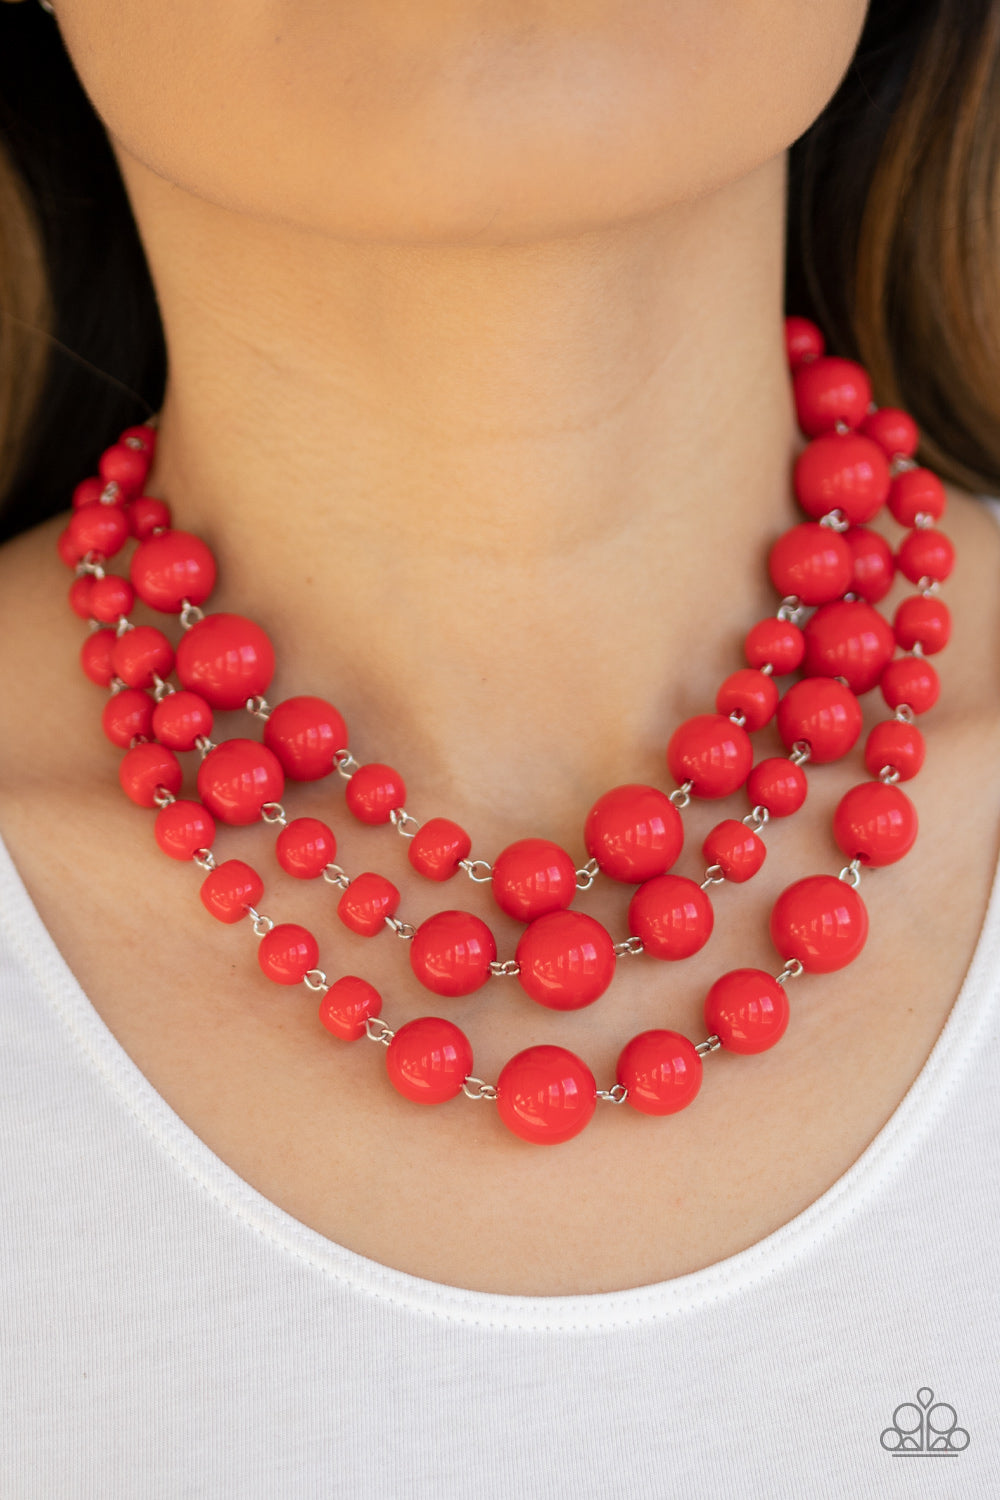 Everyone Scatter! - Red - Necklace